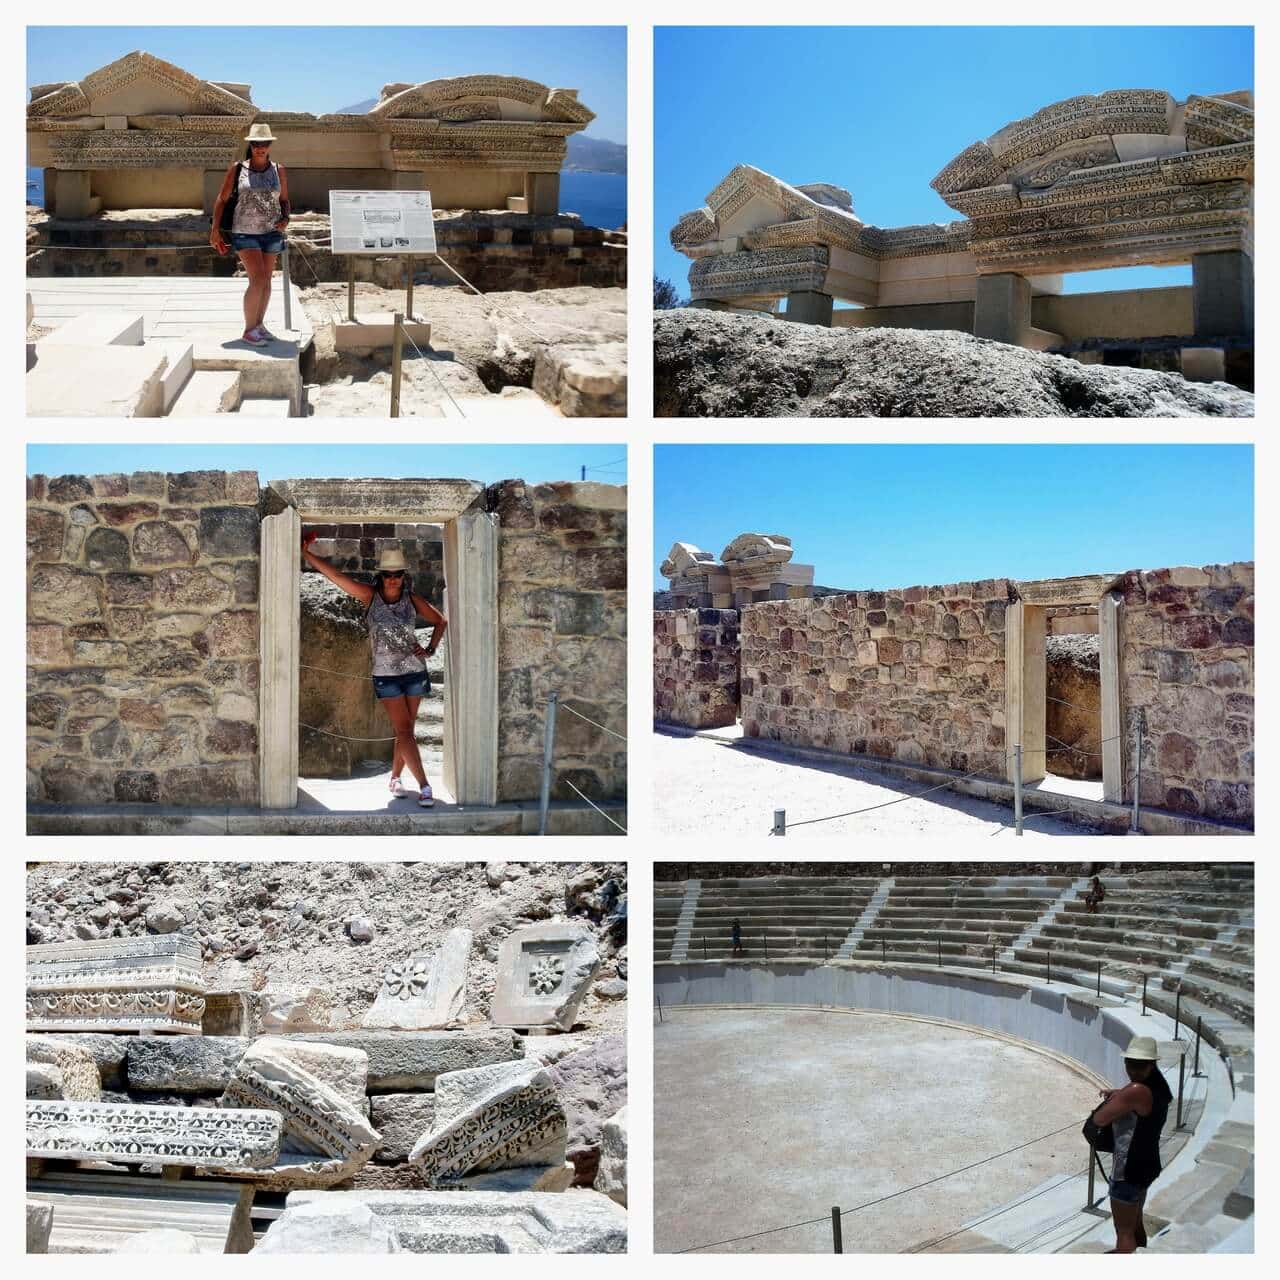 The remains of the Ancient Theatre of Milos